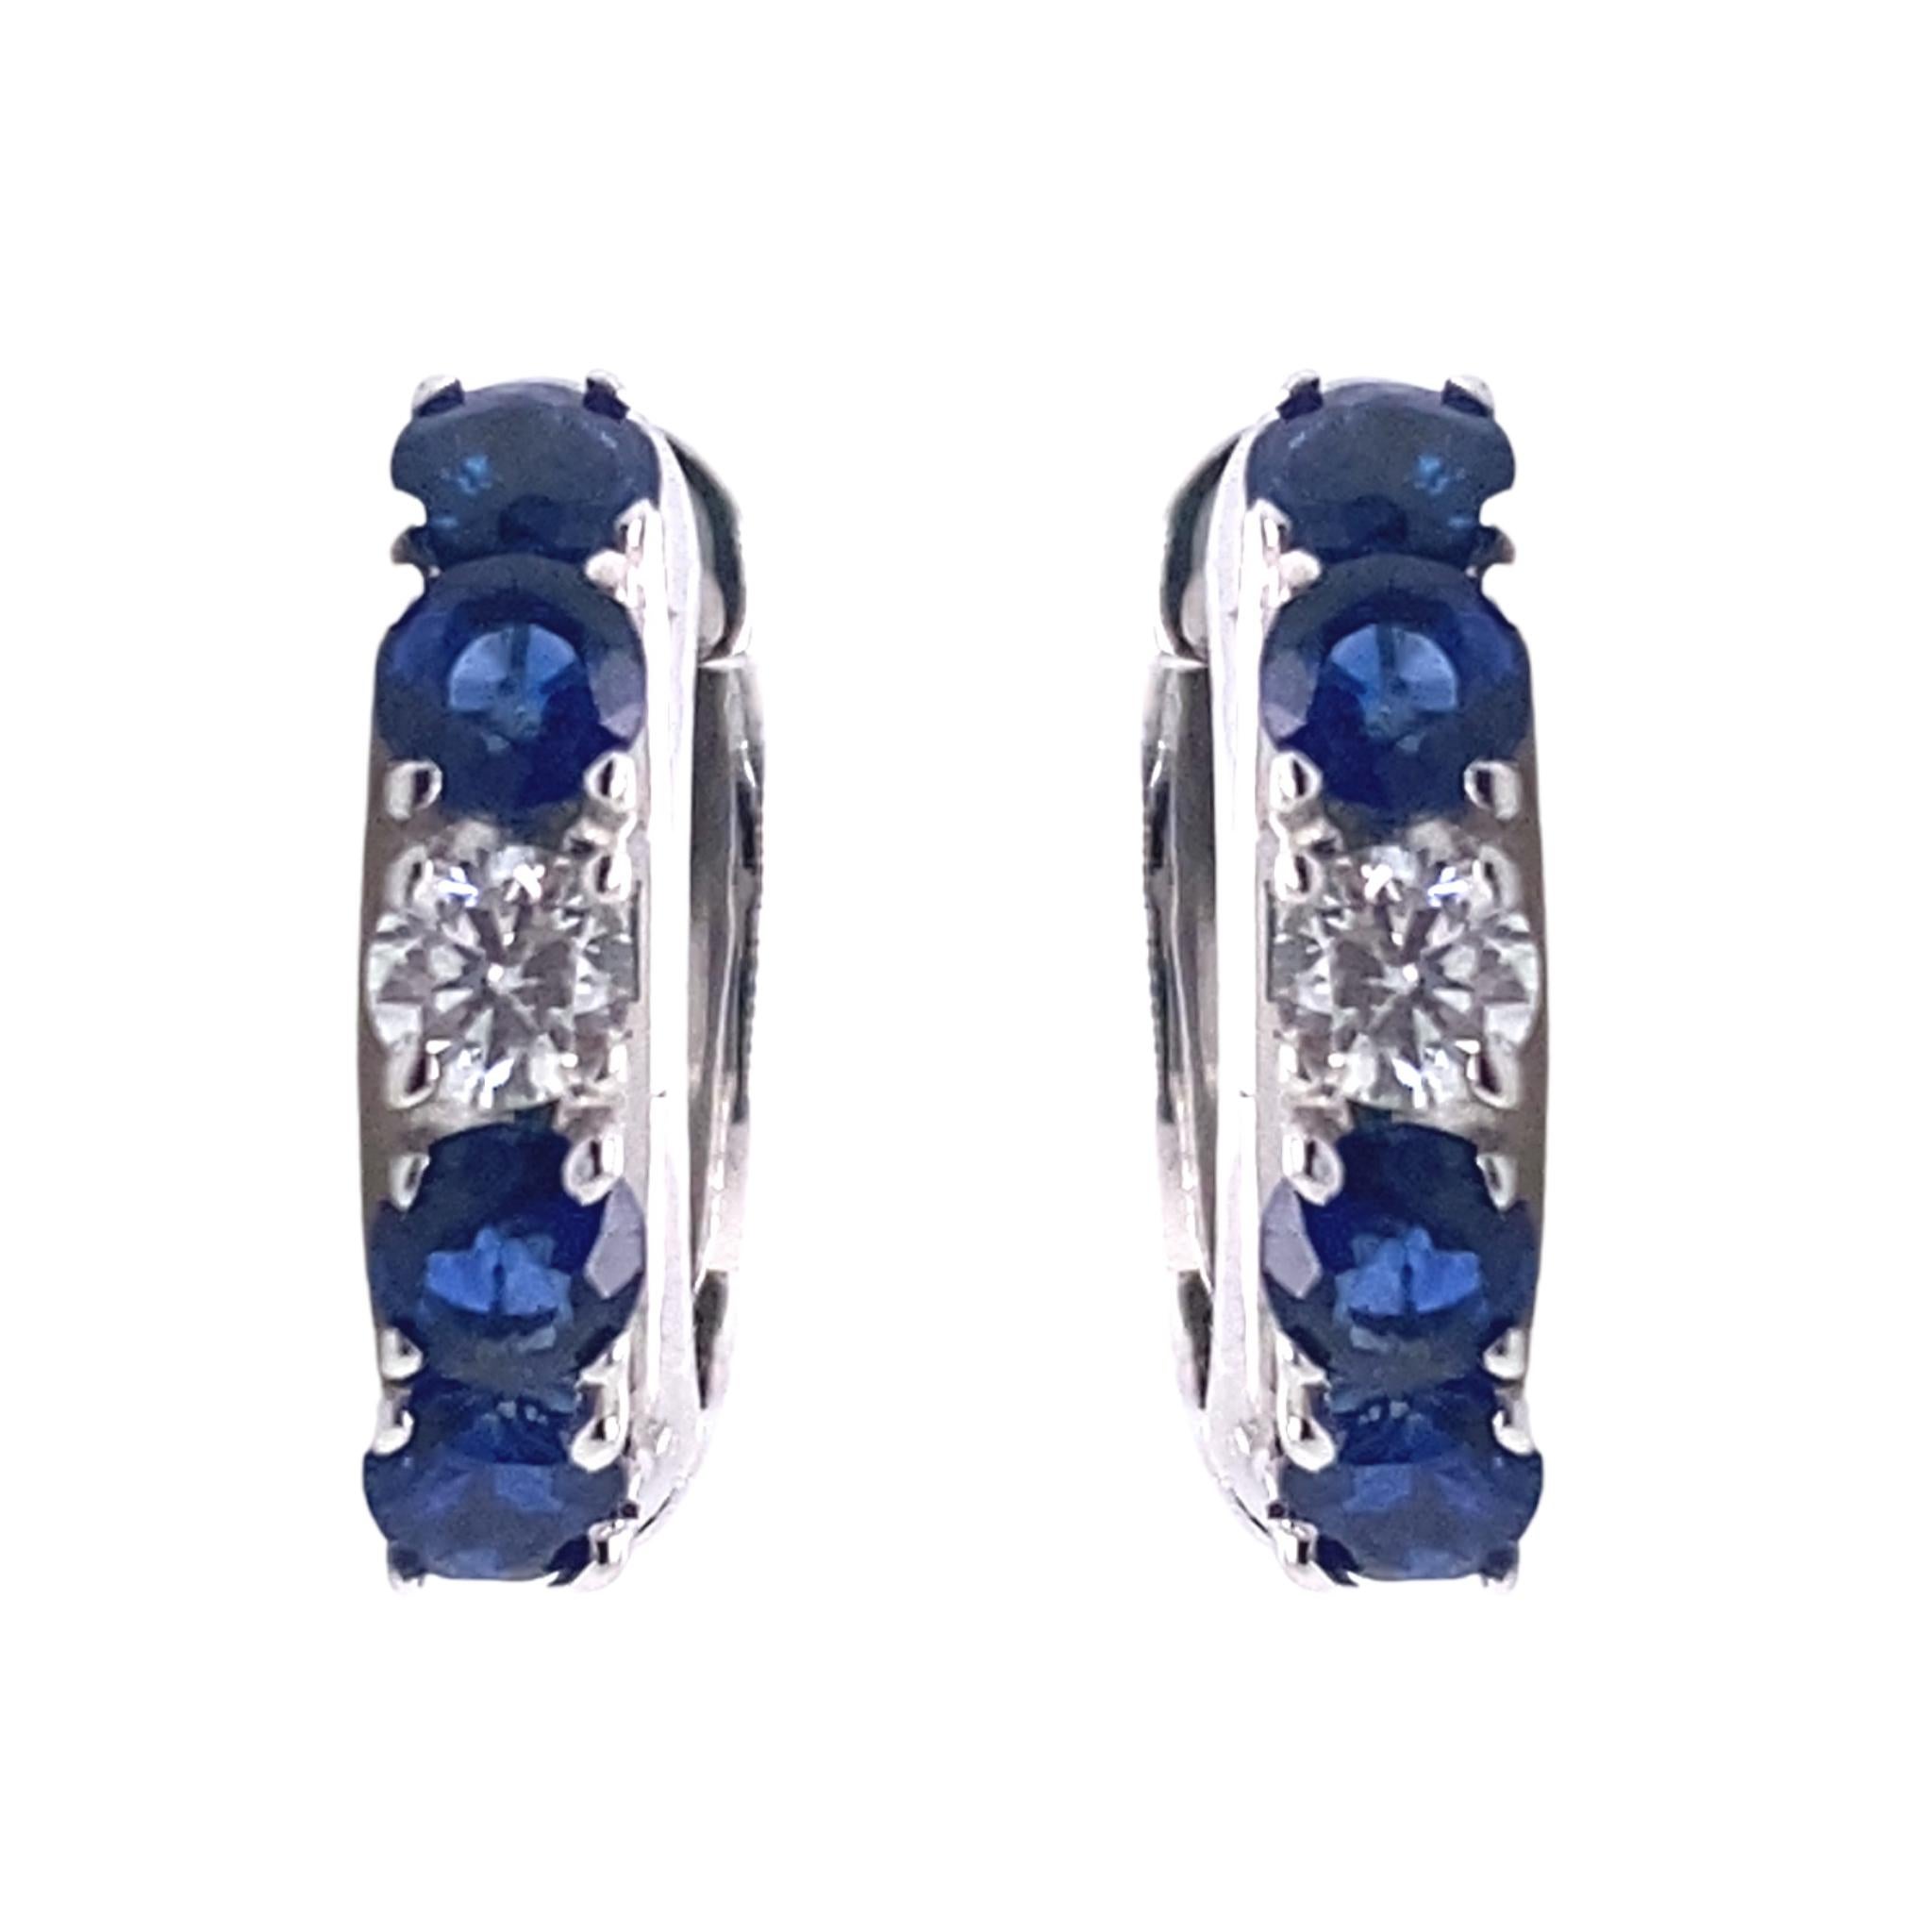 21st Century 18 Karat White Gold with F/G-VVS Diamonds and Sapphire Earrings In New Condition For Sale In Palermo, Italy PA